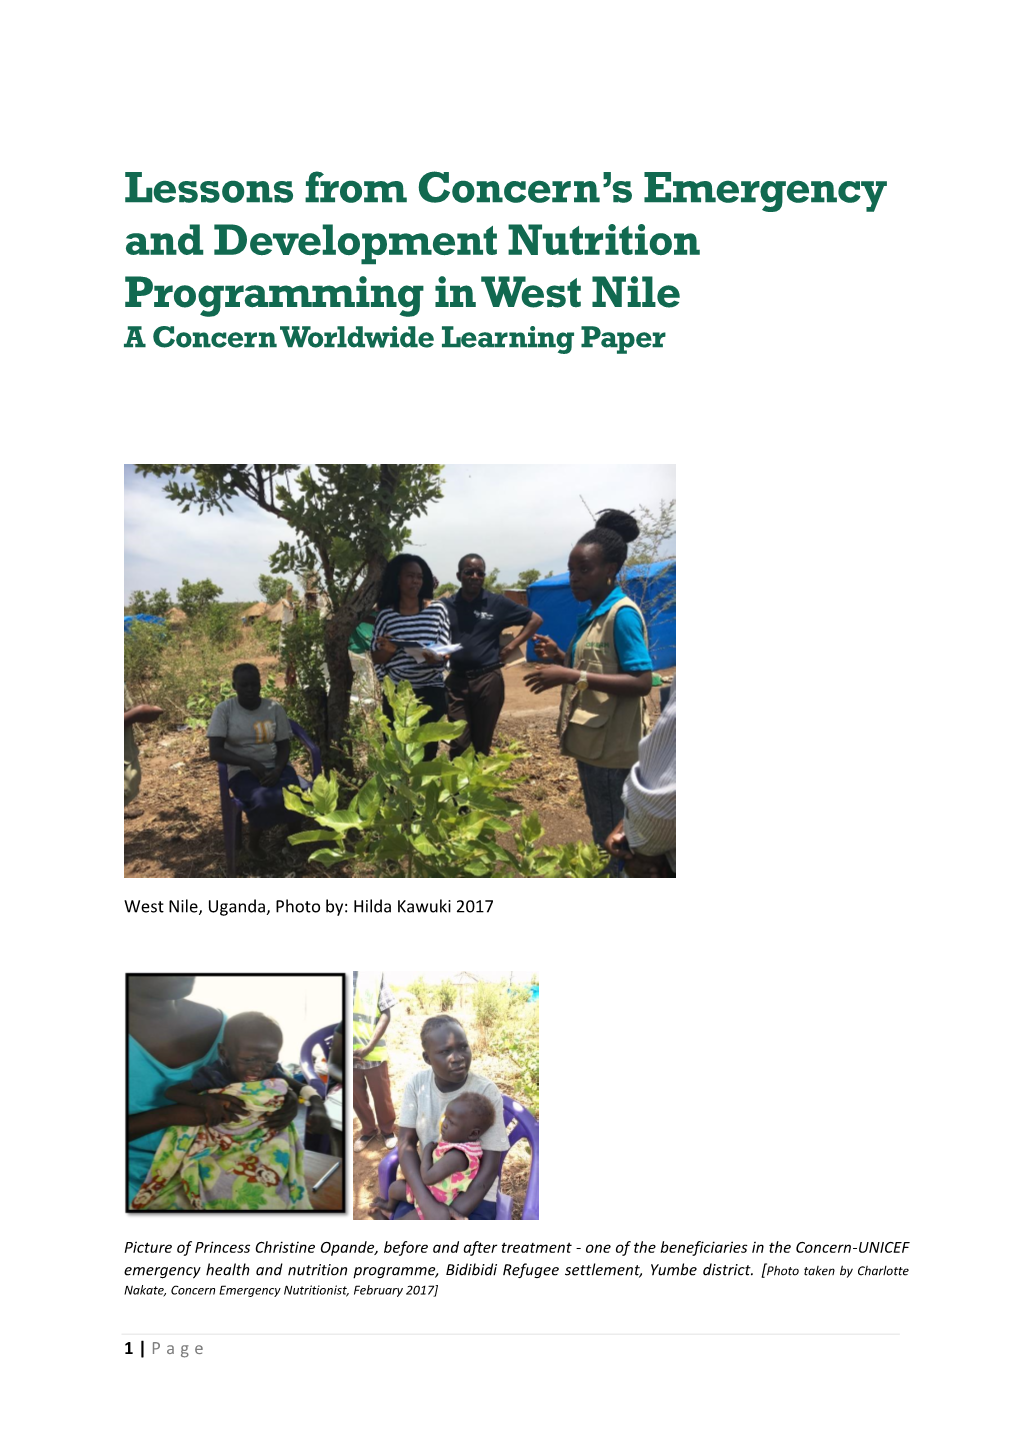 Lessons from Concern's Emergency and Development Nutrition